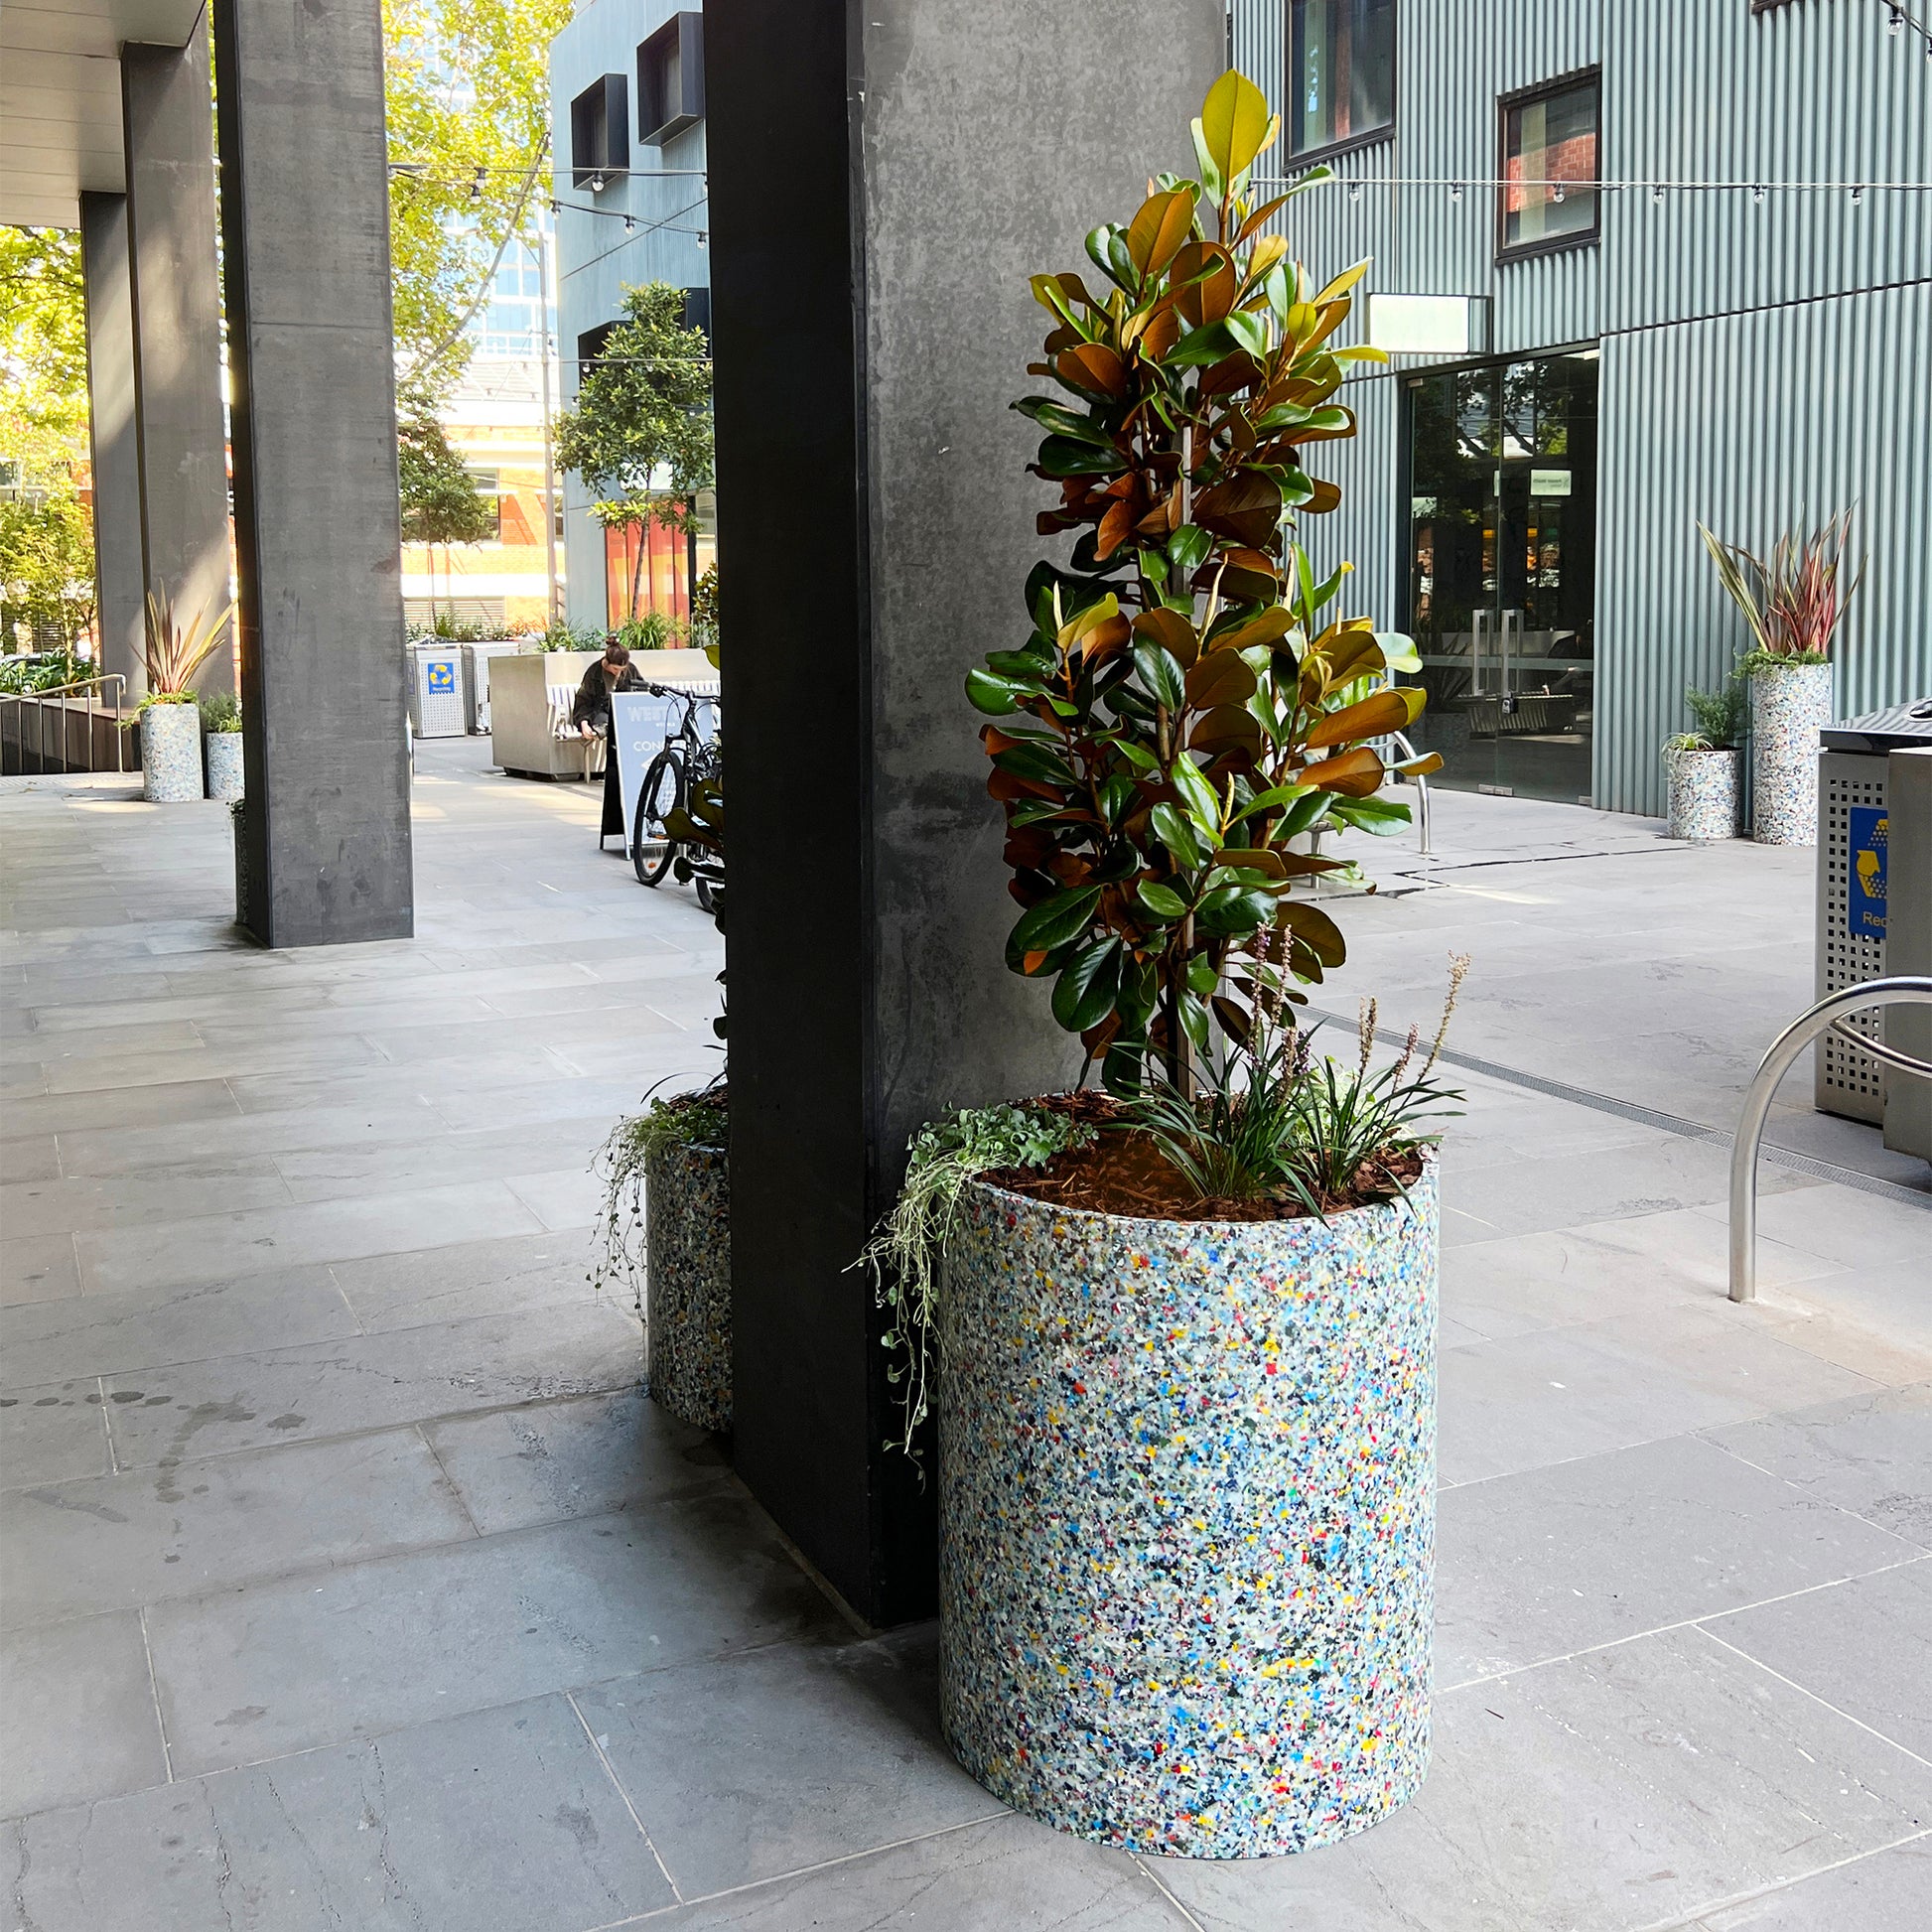 100% recycled plastic plant pots at WestEnd Melbourne | Sustainable city